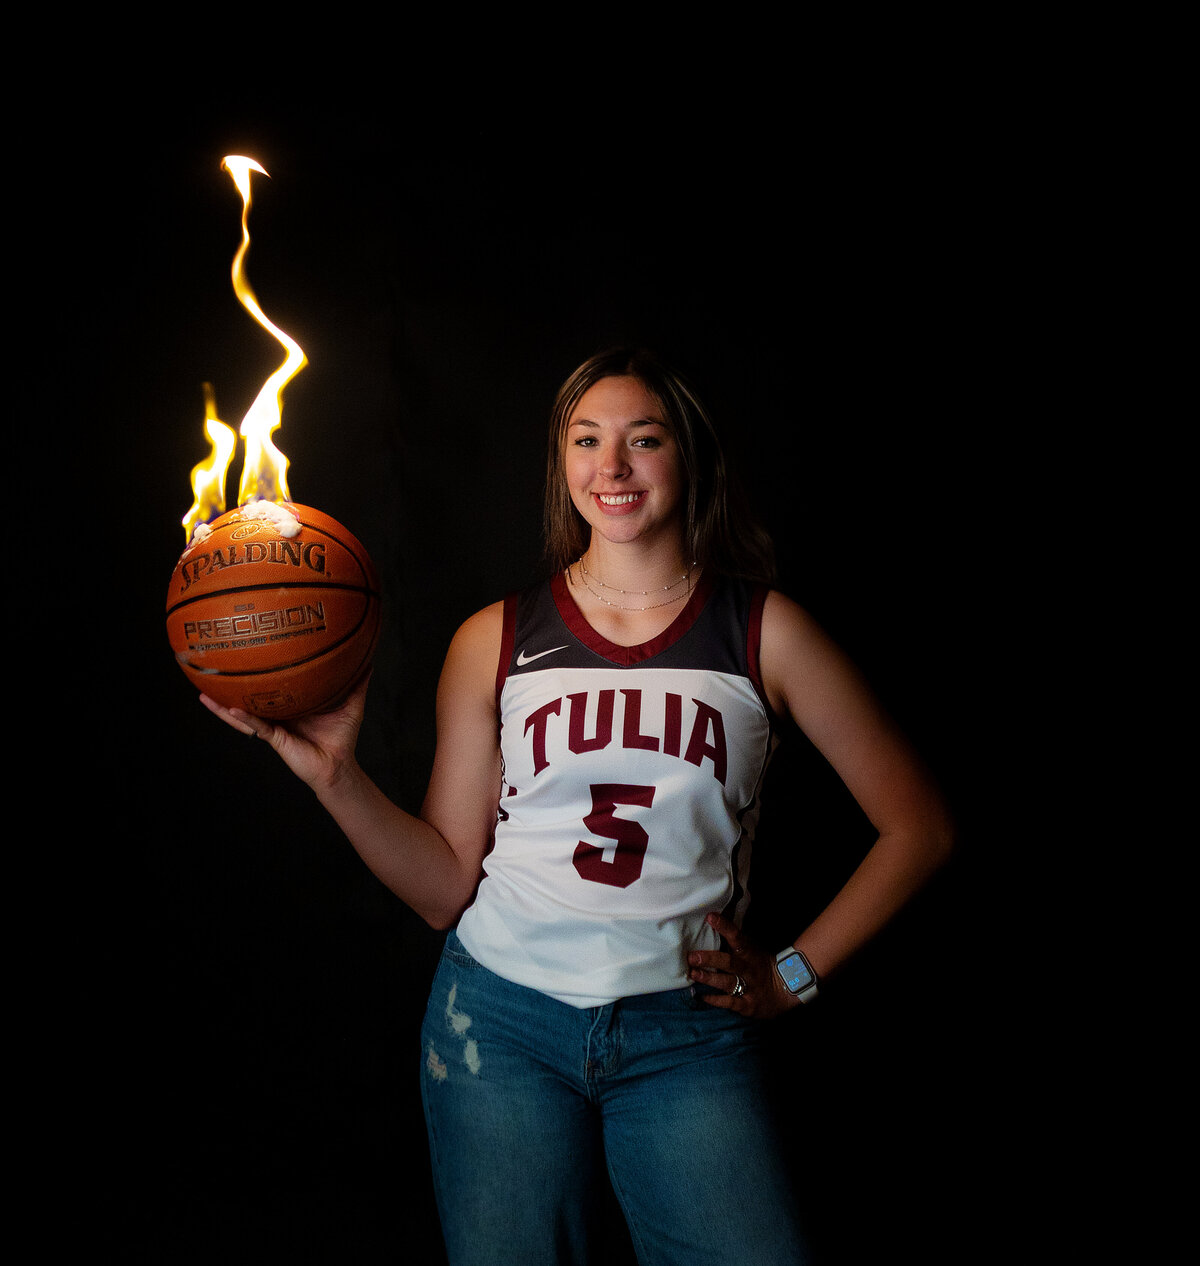 In studio session with high school varsity basketball player while the ball is on fire.